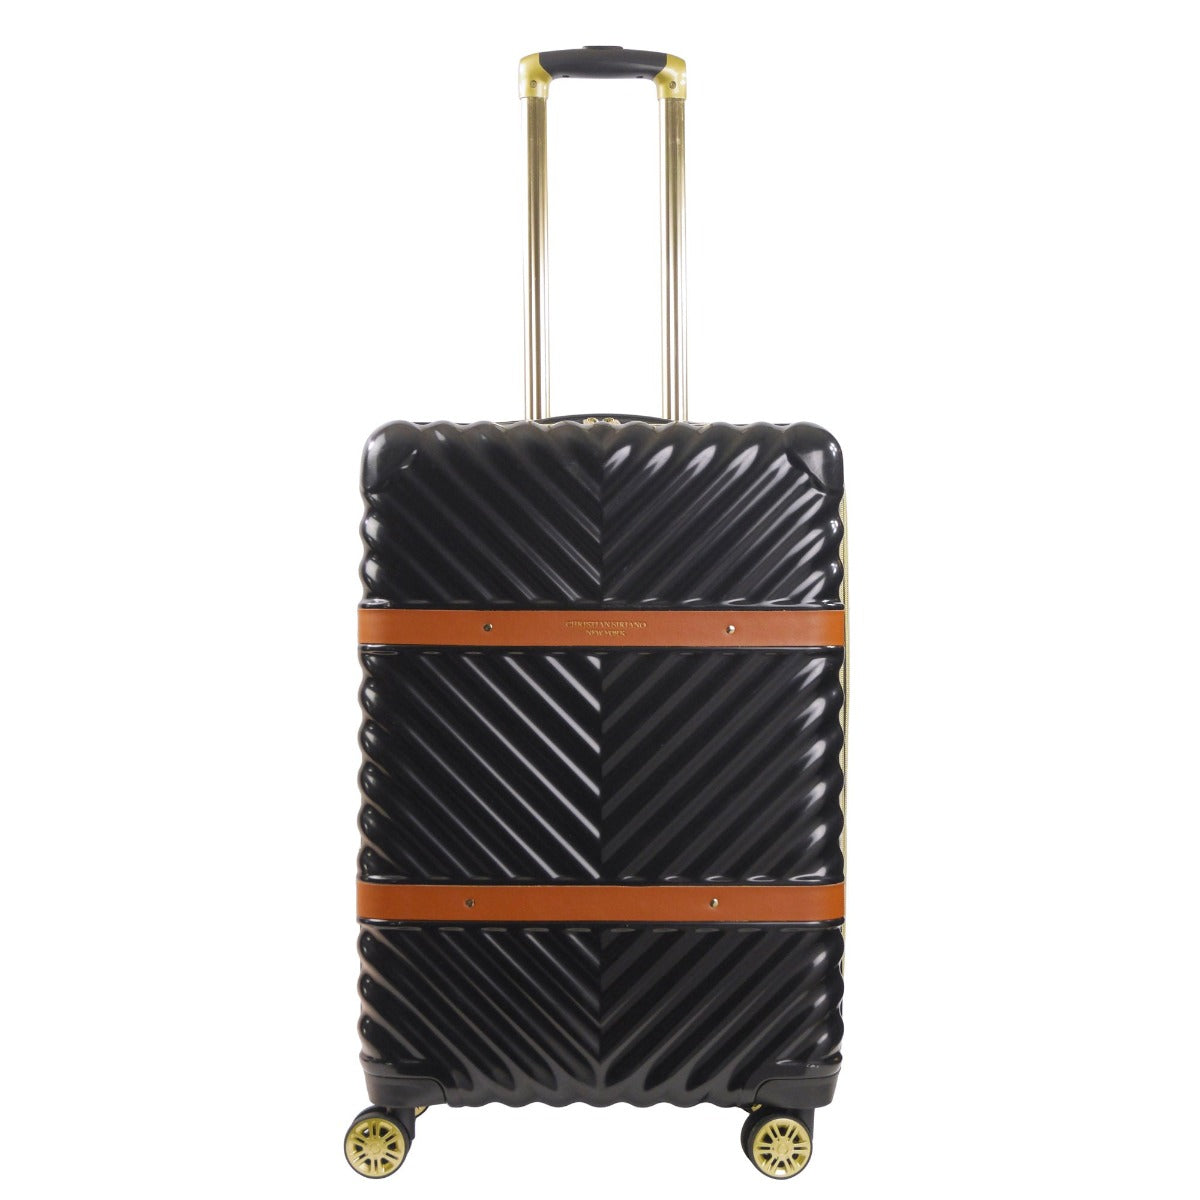 Christian Siriano New York Stella 25 inch hardside spinner checked suitcase black - best durable luggage for travelling